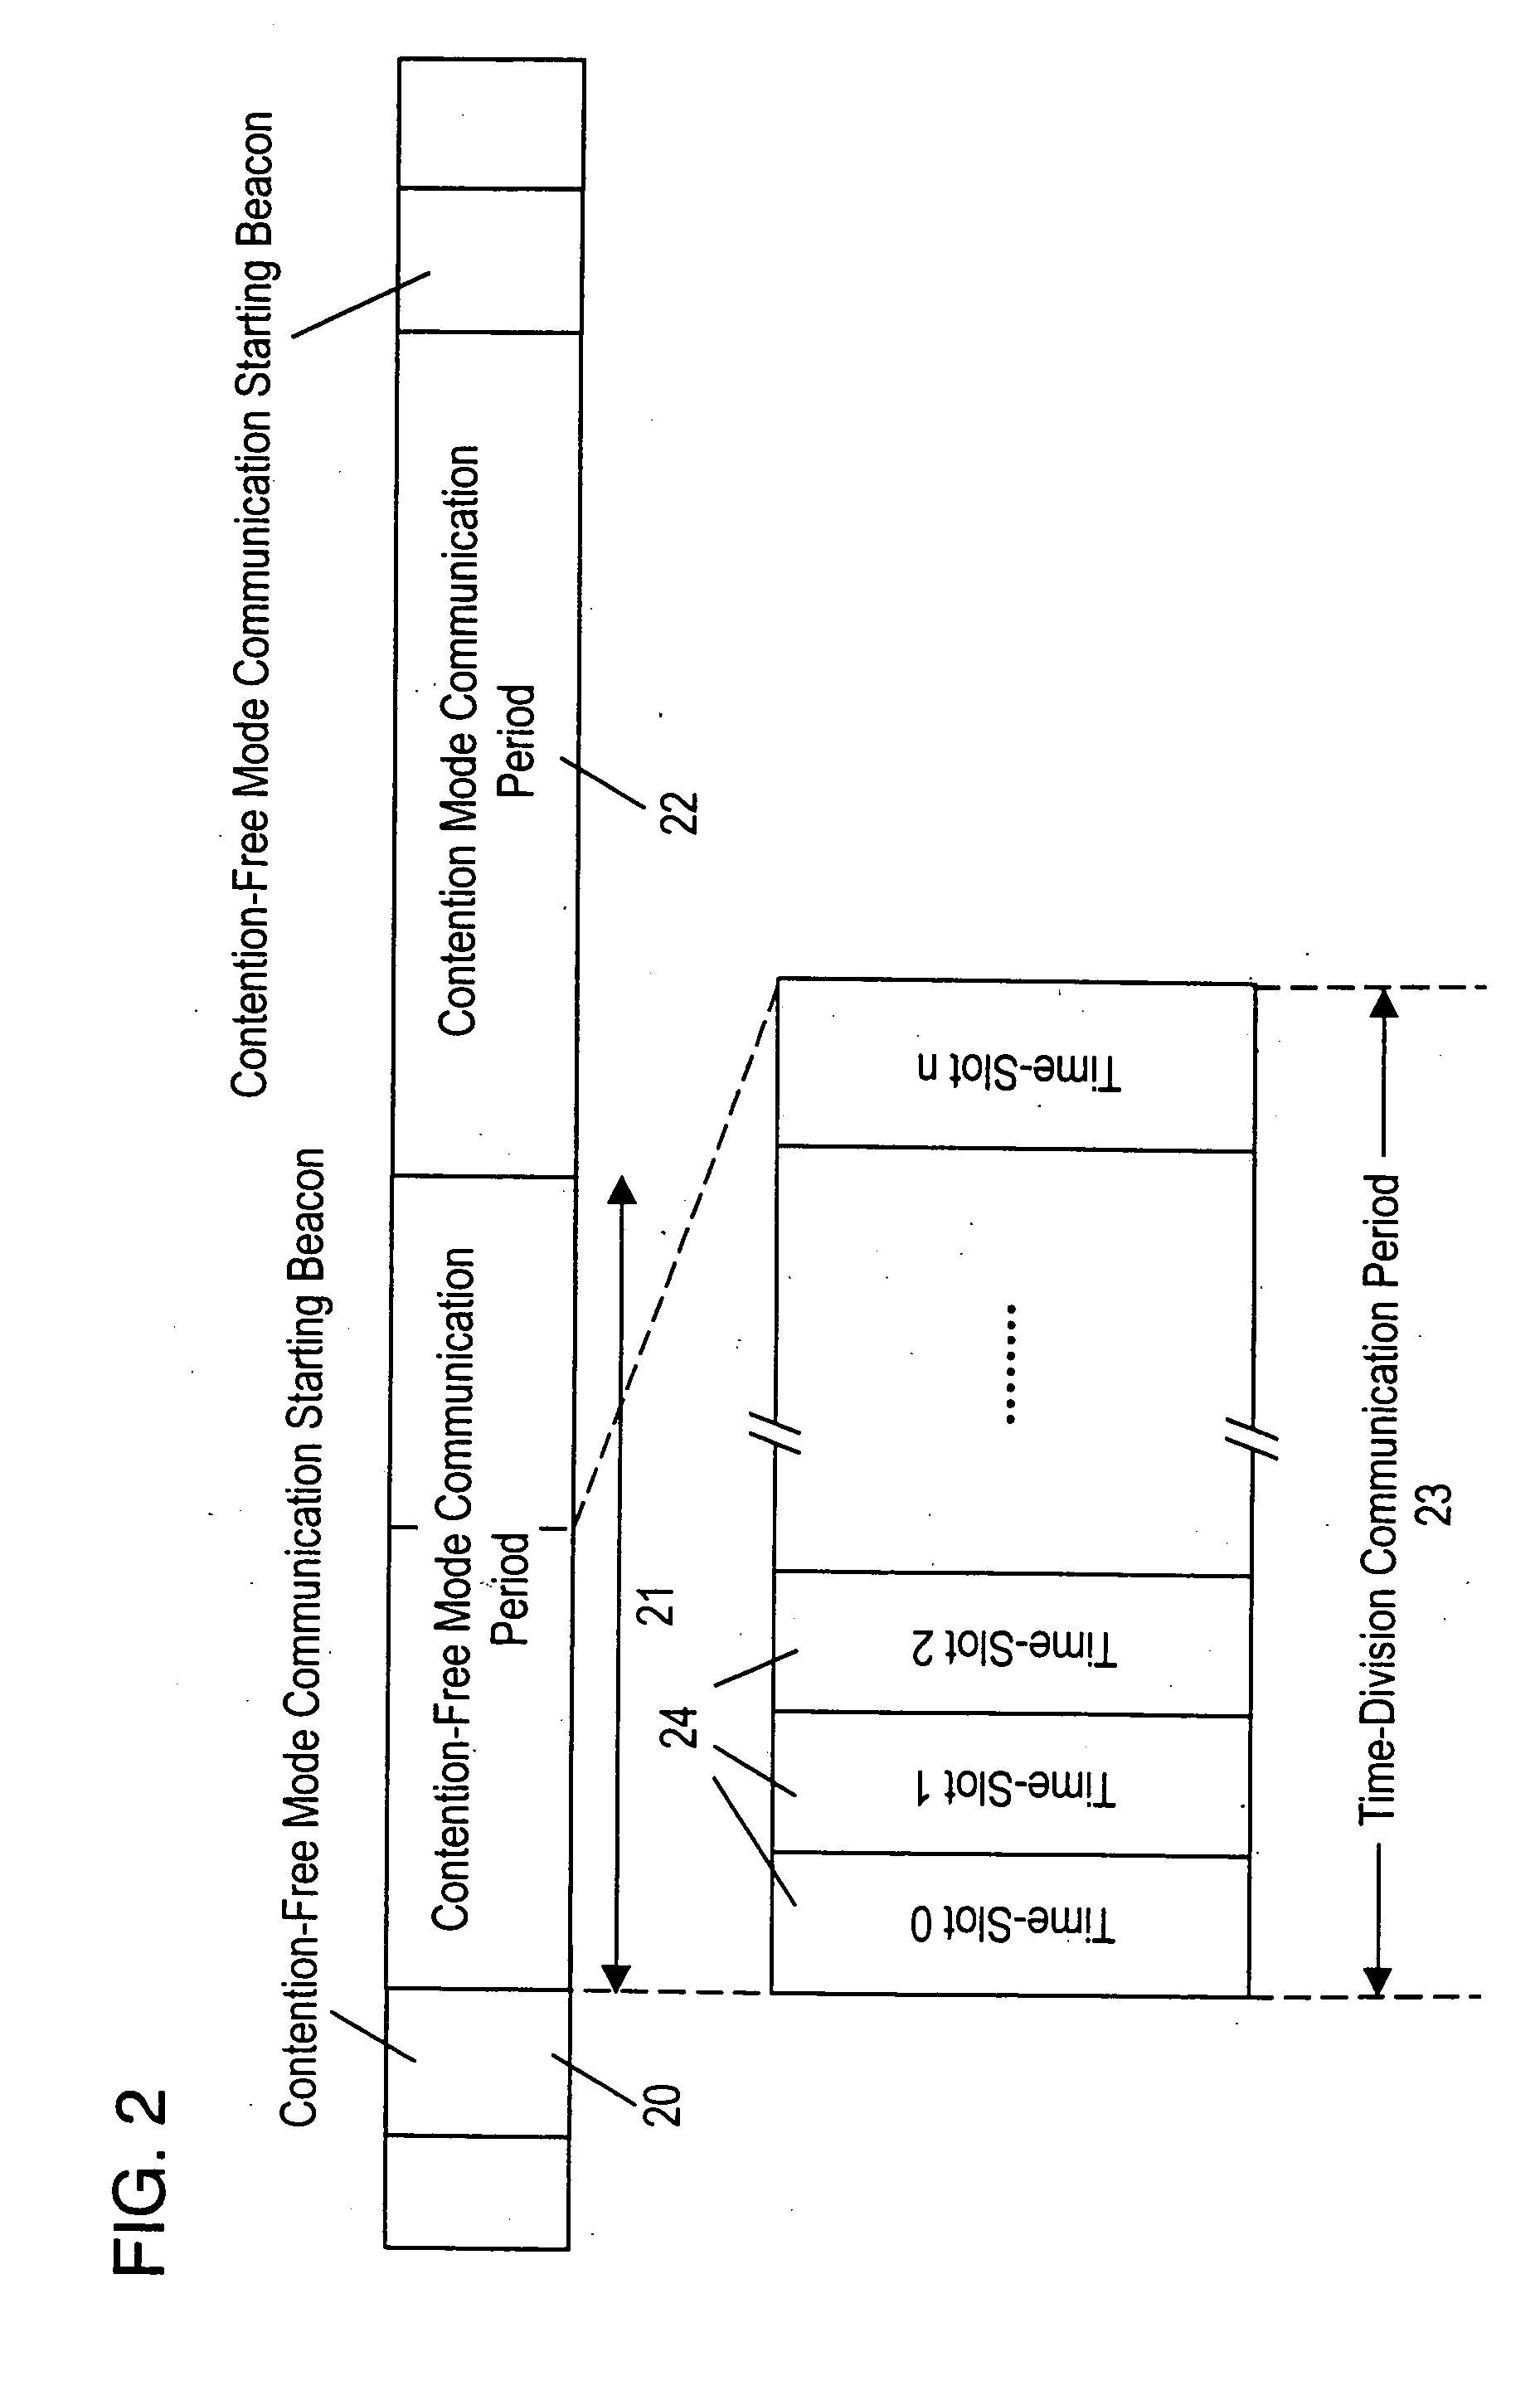 Wireless network system and communication method employing both contention mode and contention-free mode